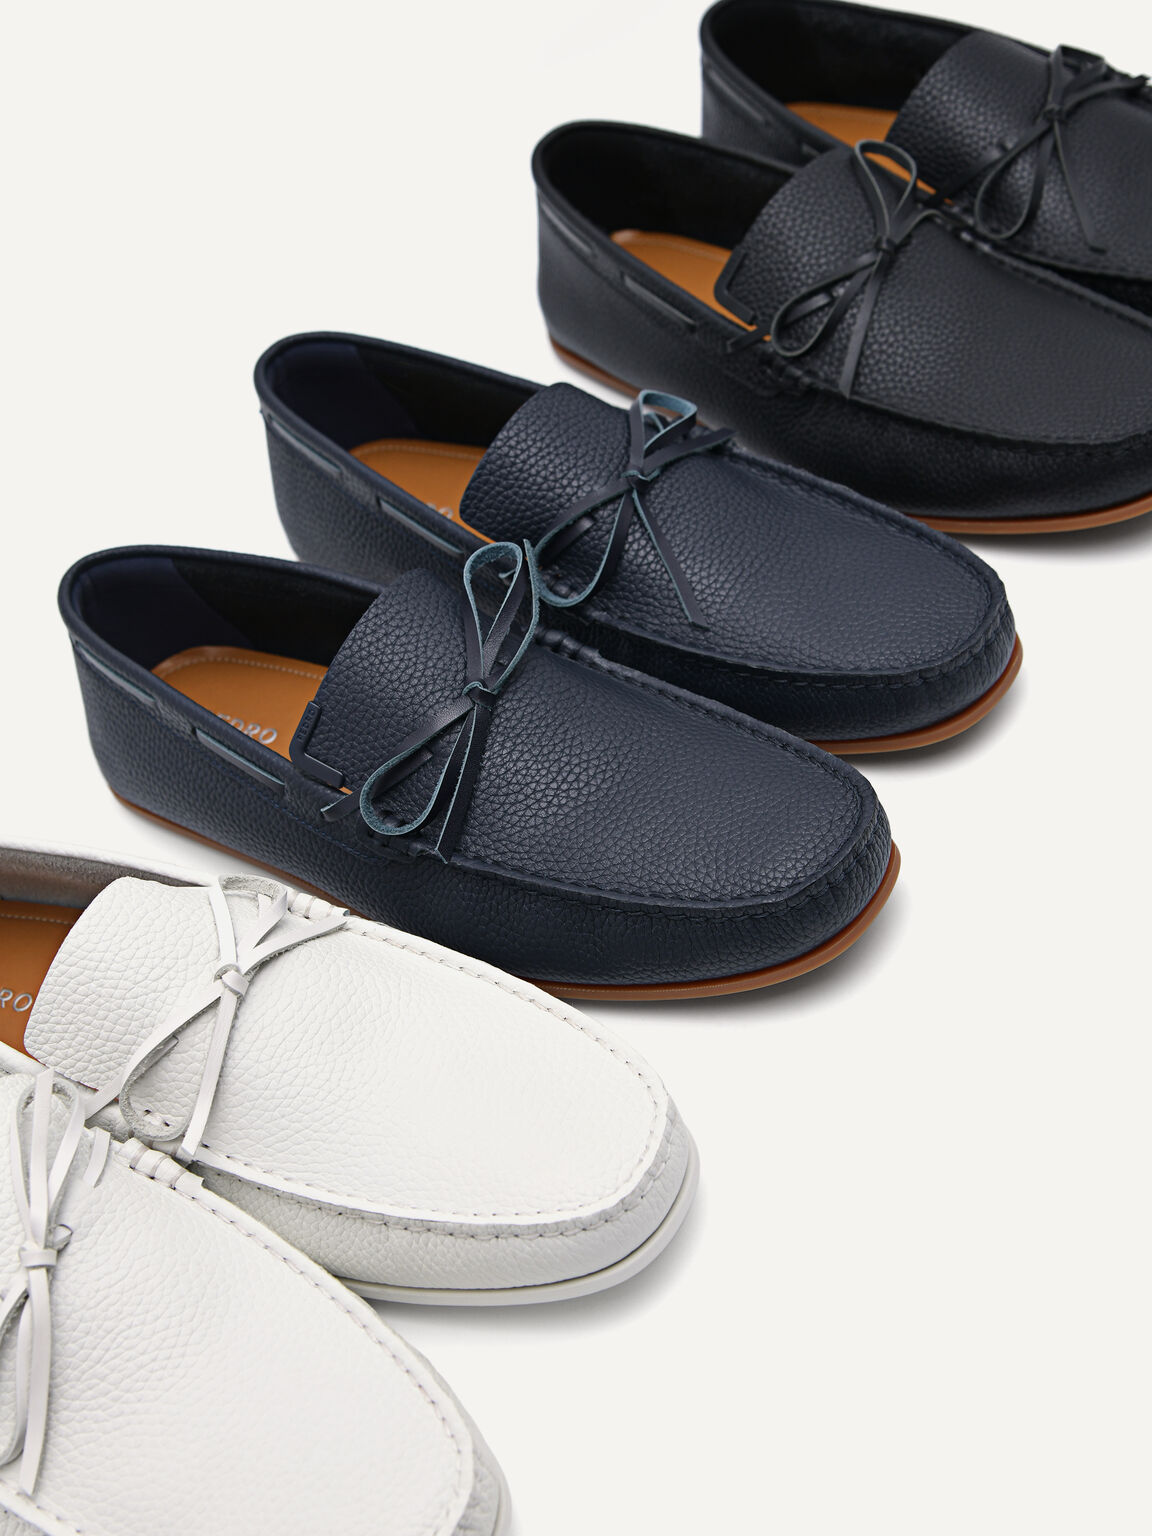 Leather Moccasins with Bow Detail, Navy